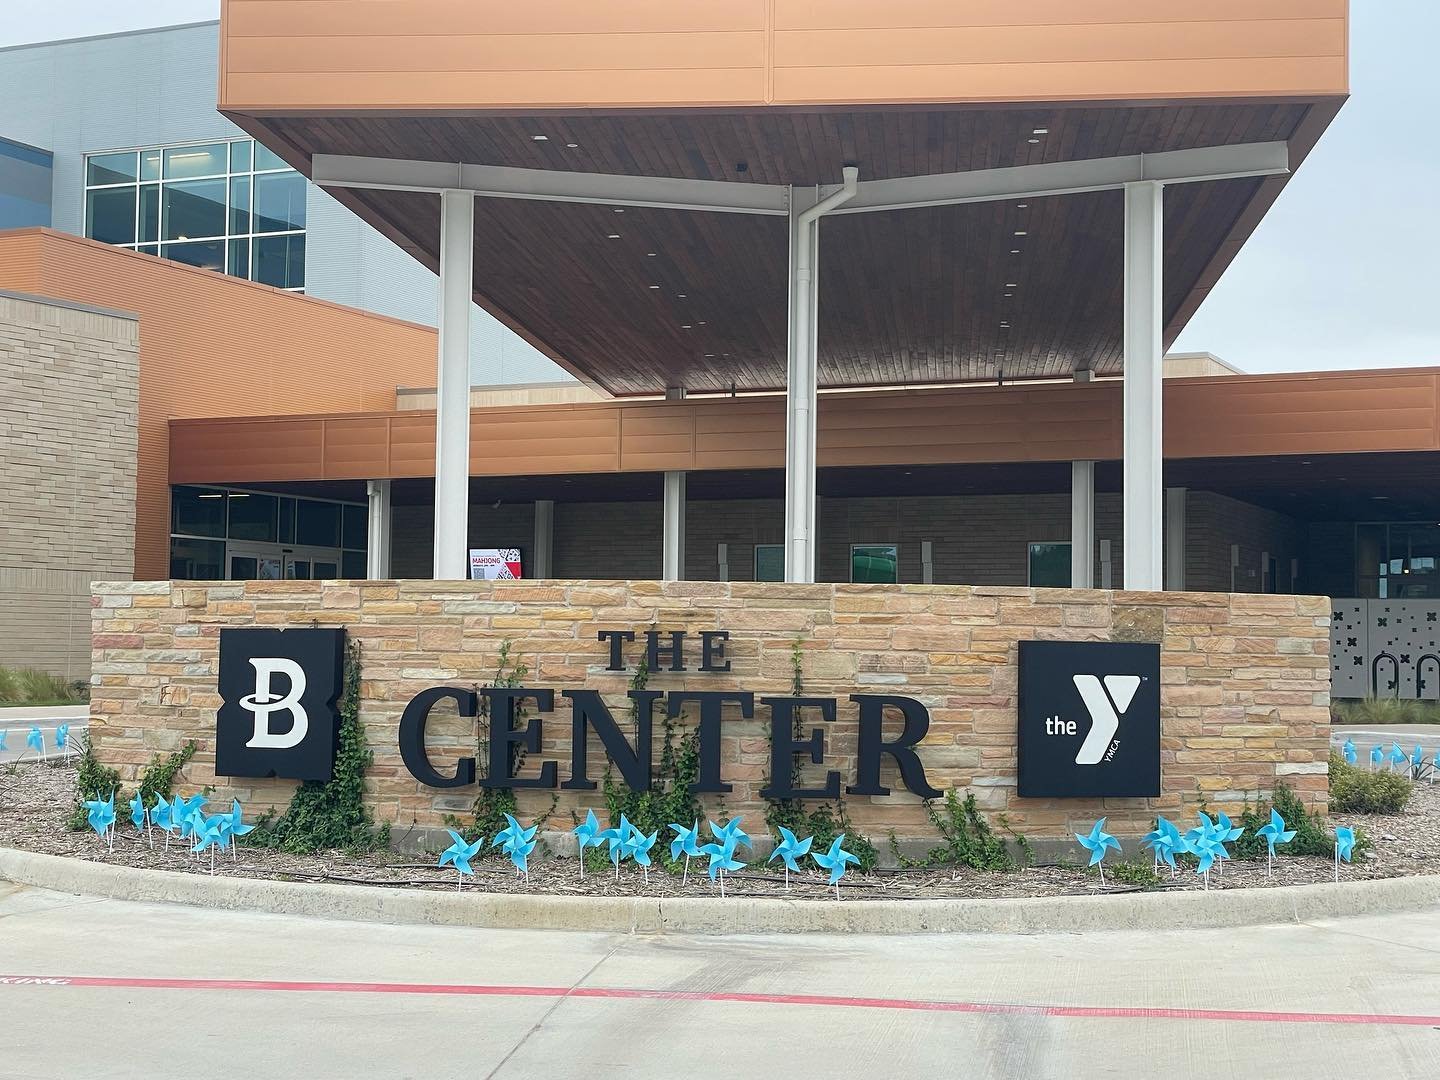 We now have a #capm pinwheel installation at @bedfordcenterymca - we also have a special Information Session there next week - Tuesday at 12:30pm. Sign up at speakupforachild.org/register #childabuseprevention @cityofbedfordtx